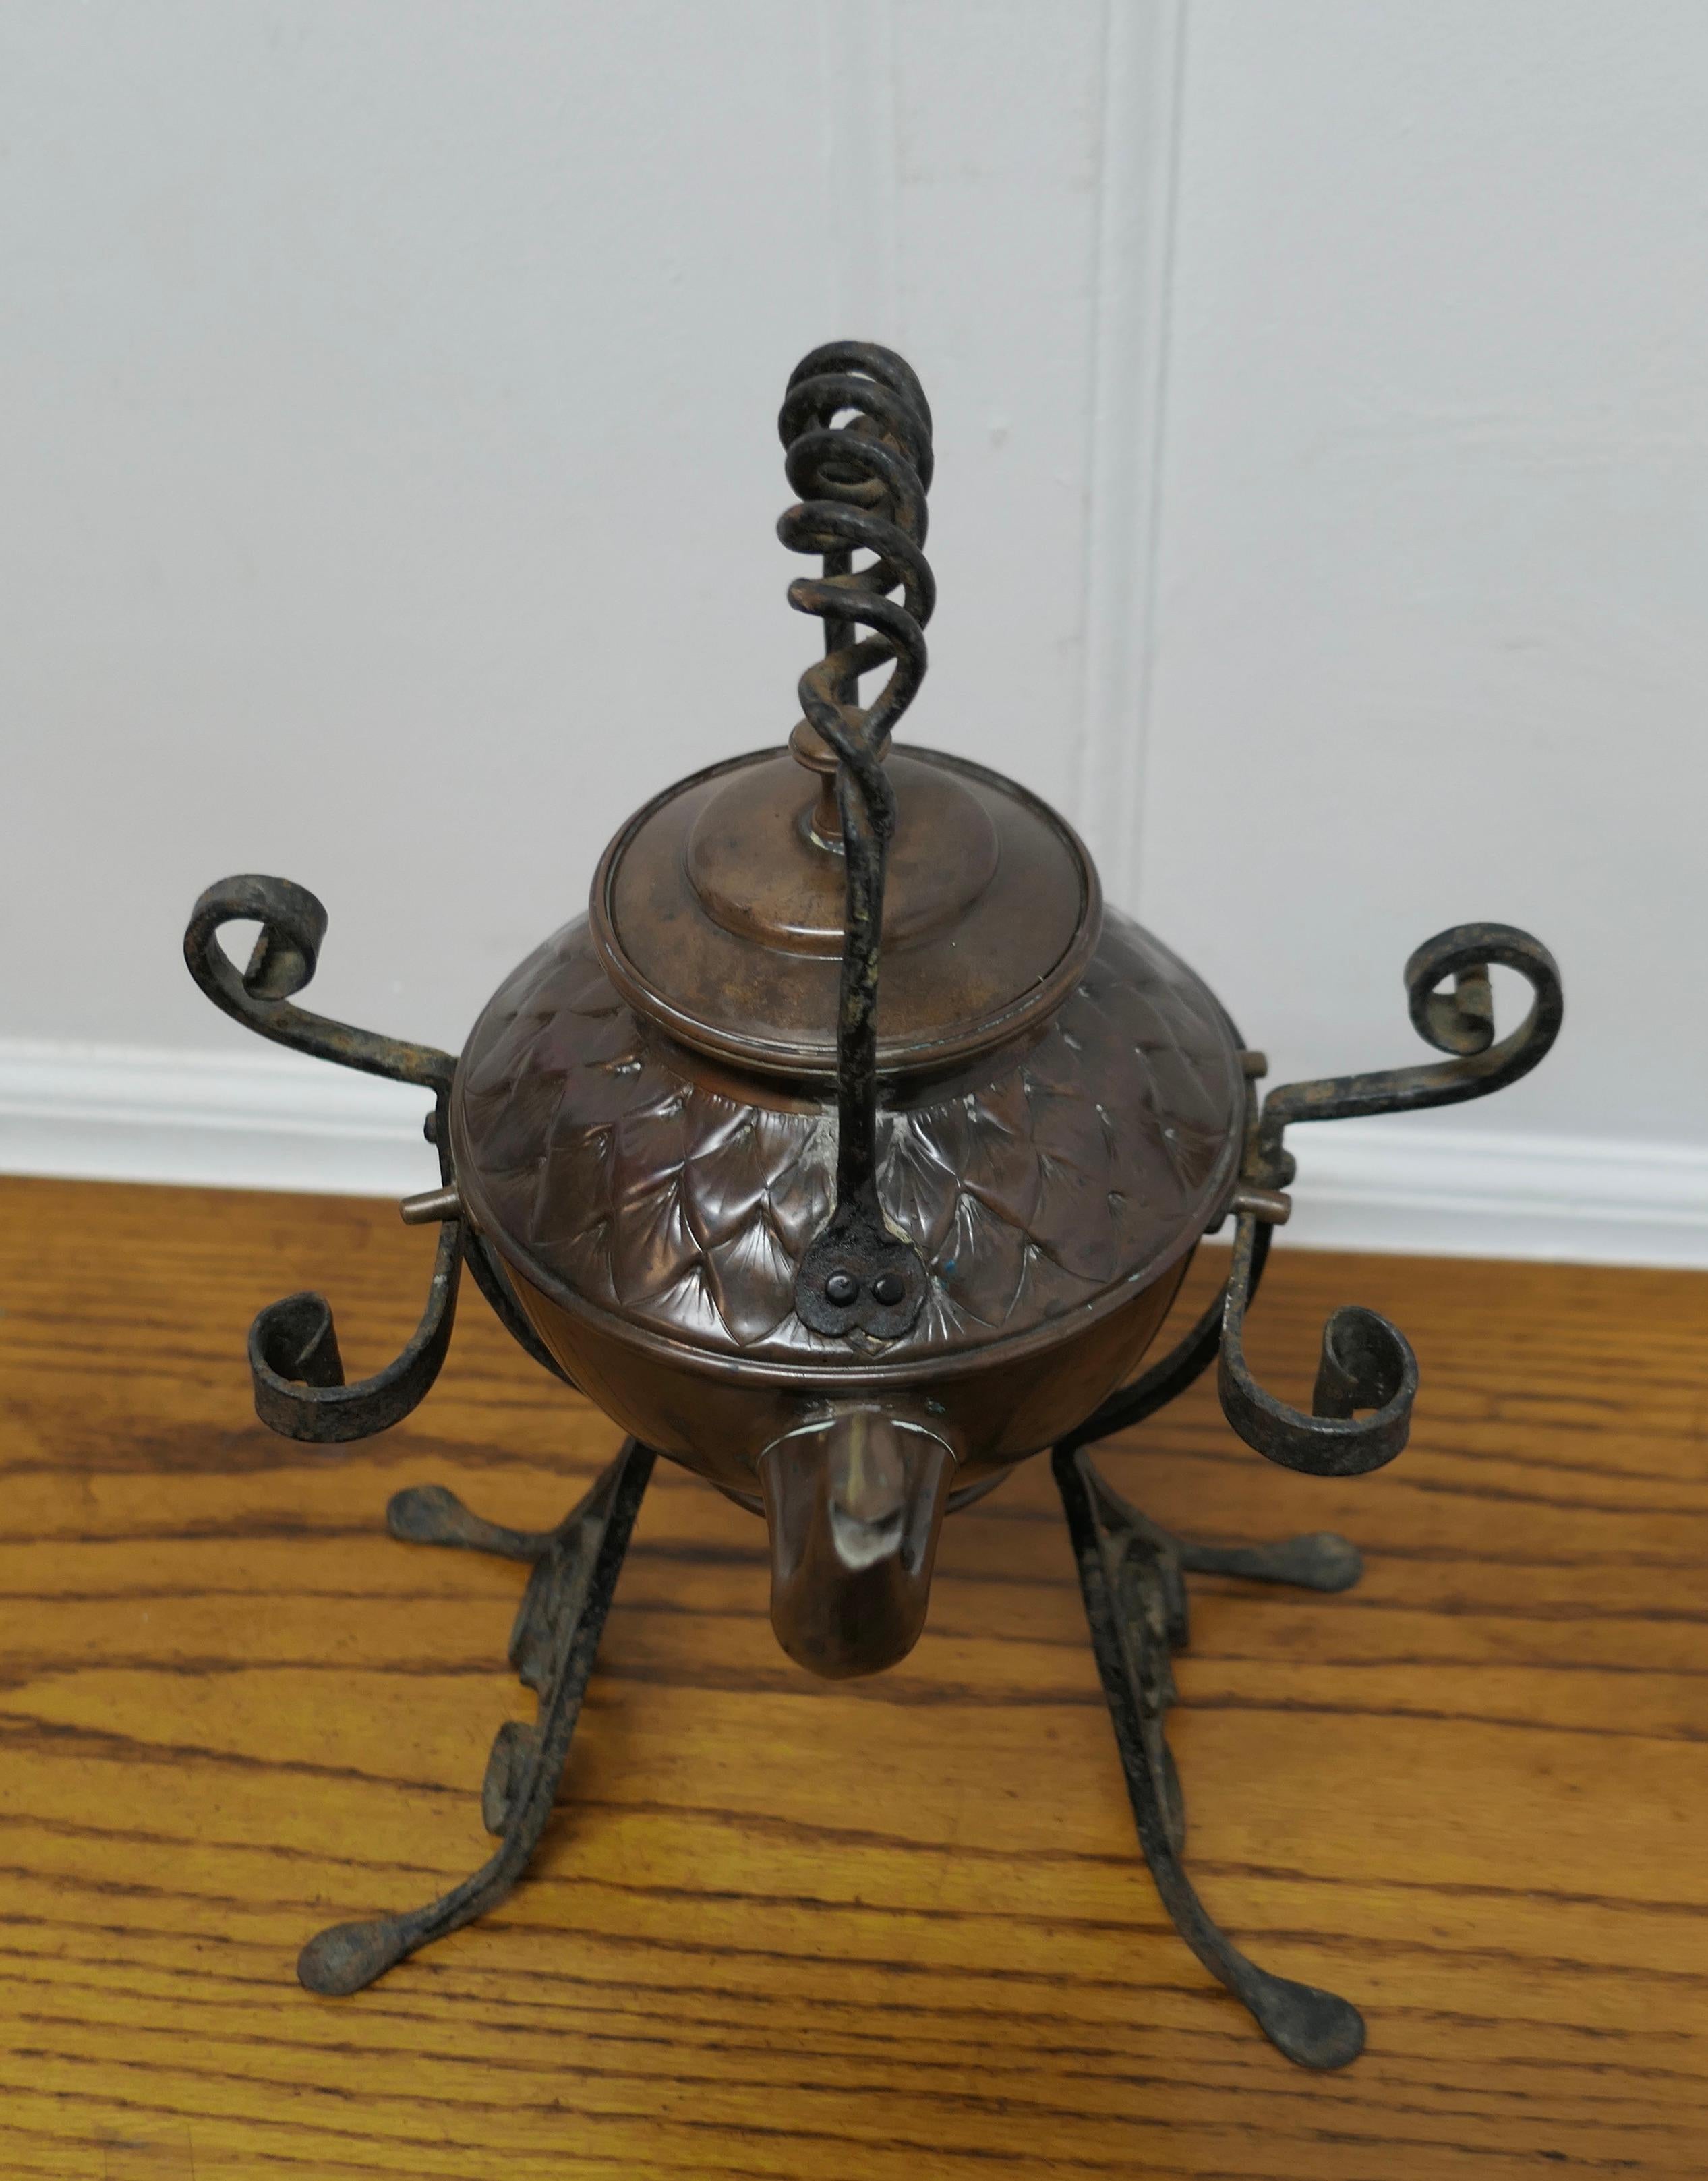 19th Century Copper Kettle on a Wrought Iron Stand  

This charming Arts and Crafts Kettle stands on its own wrought iron stand
The kettle is 15” high on the stand, 11” wide and 10” deep
TVY151
